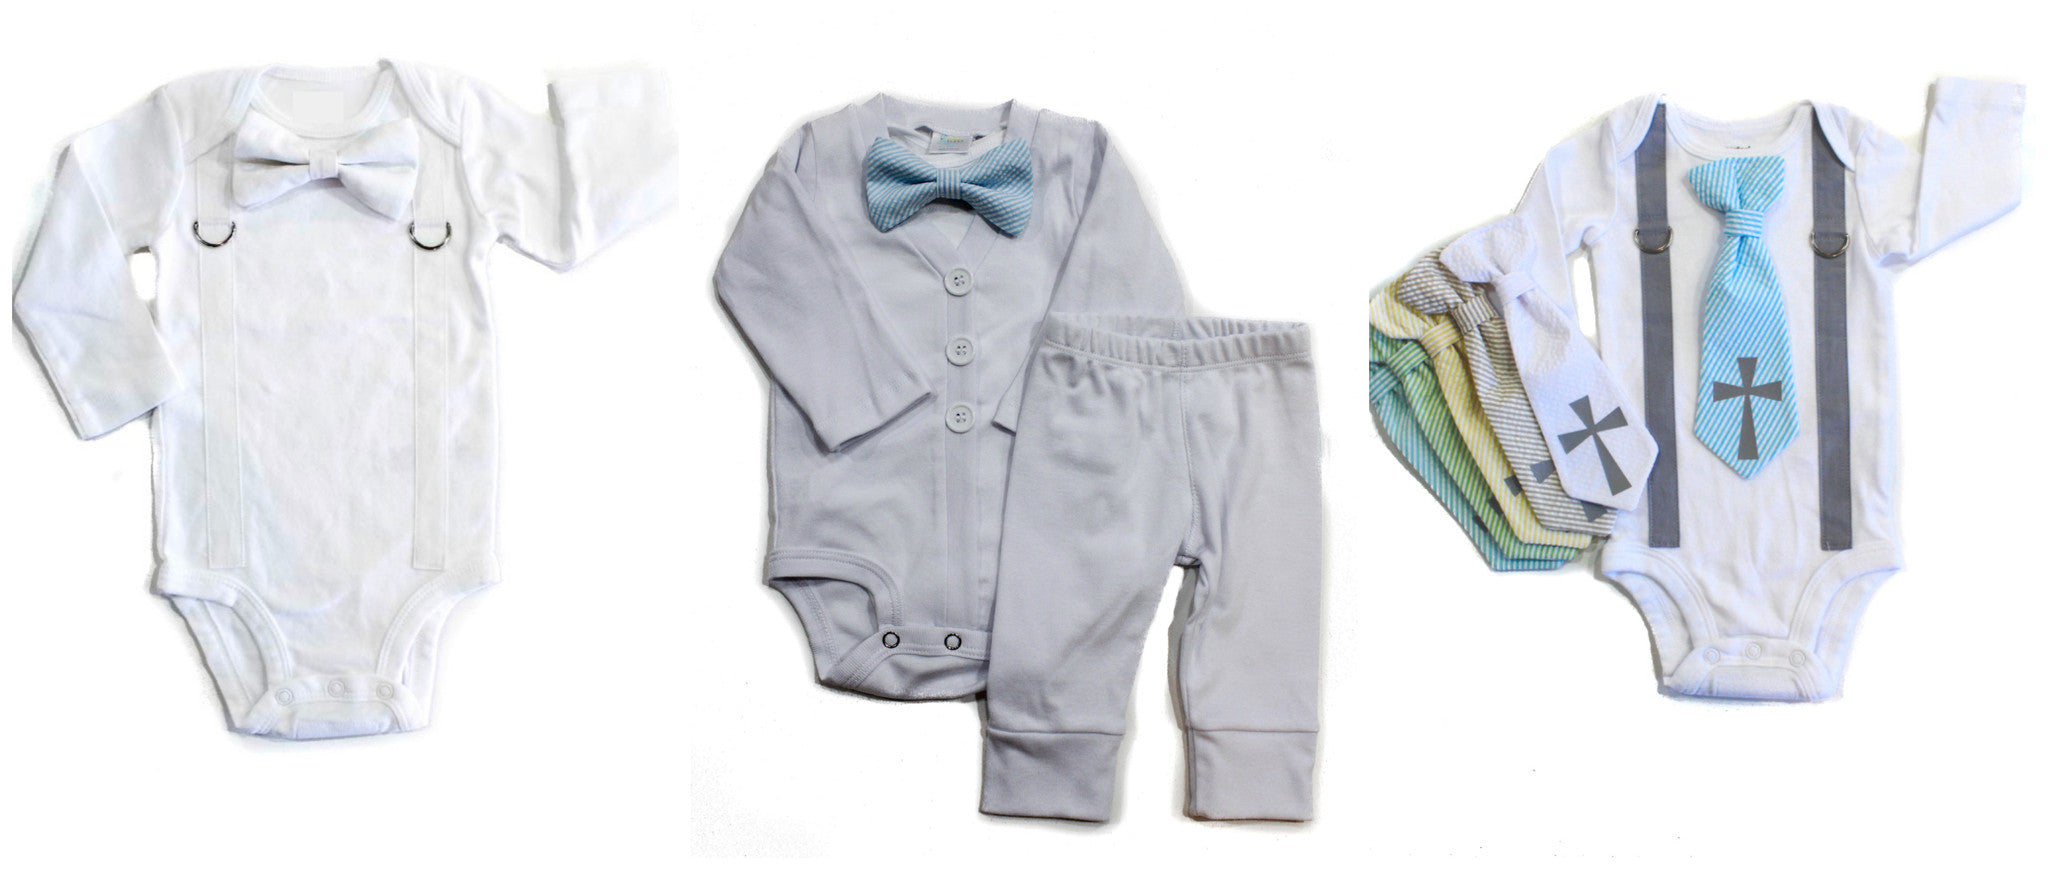 baby boy baptism outfits